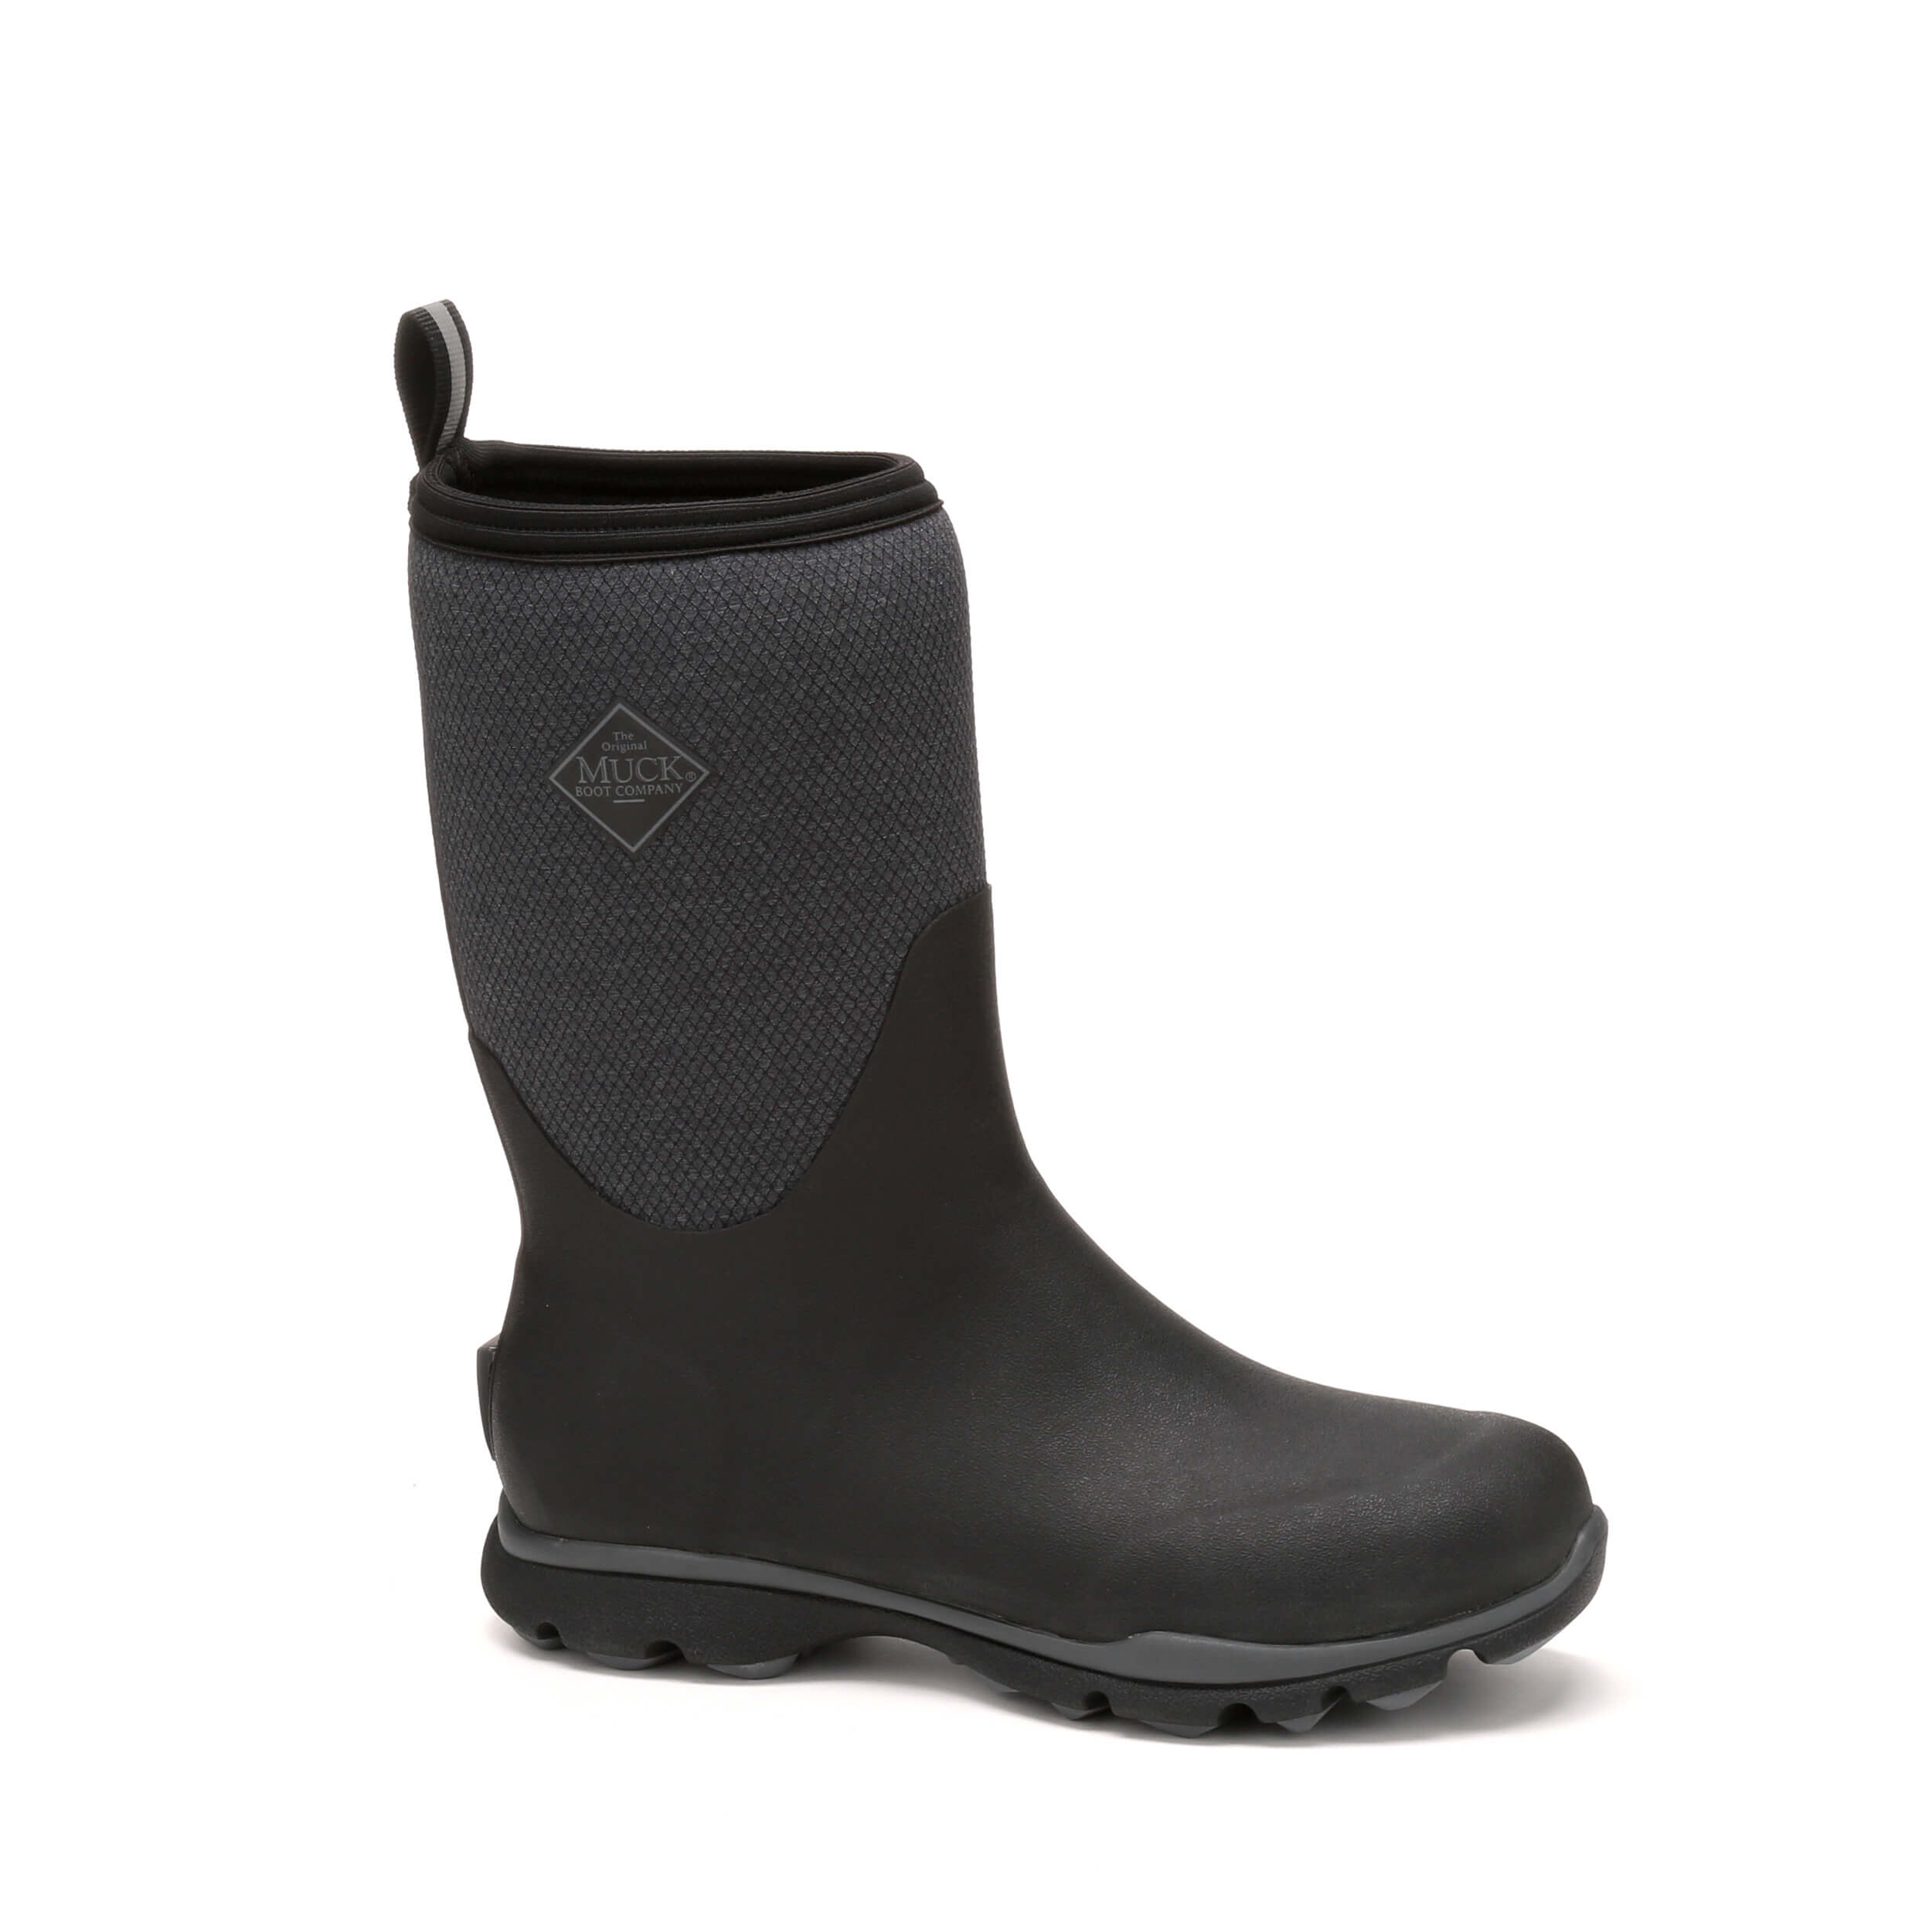 Сапоги Muck Boot Arctic excursion mid gray - фото 1